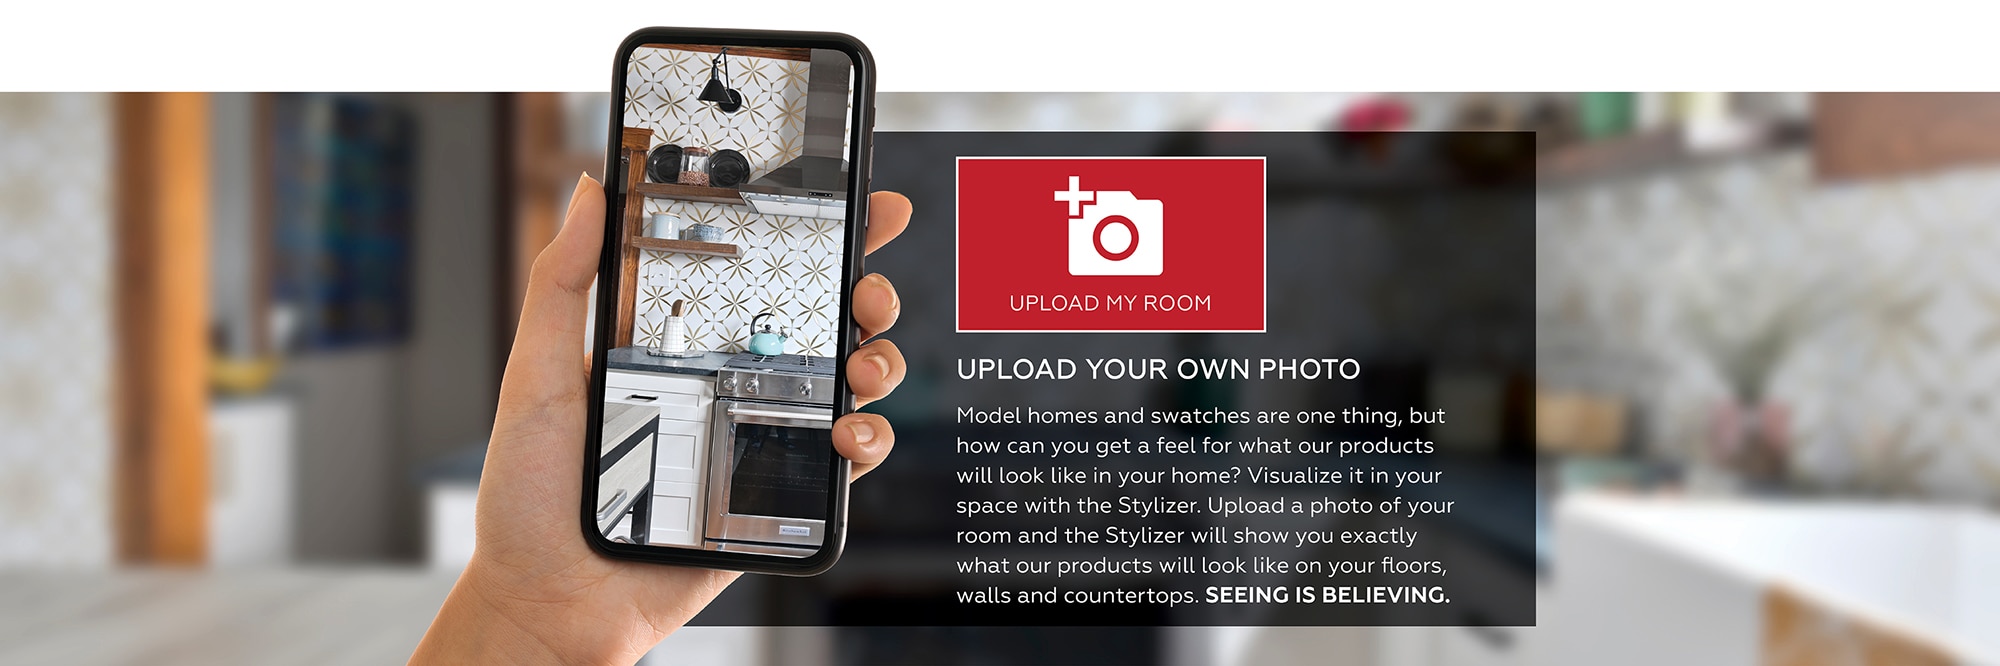 Upload my Room. Upload your own photo. Model homes and swatches are one thing, but how can you get a feel for what our products will look like in your home? Visualize it in your space with the Stylizer.